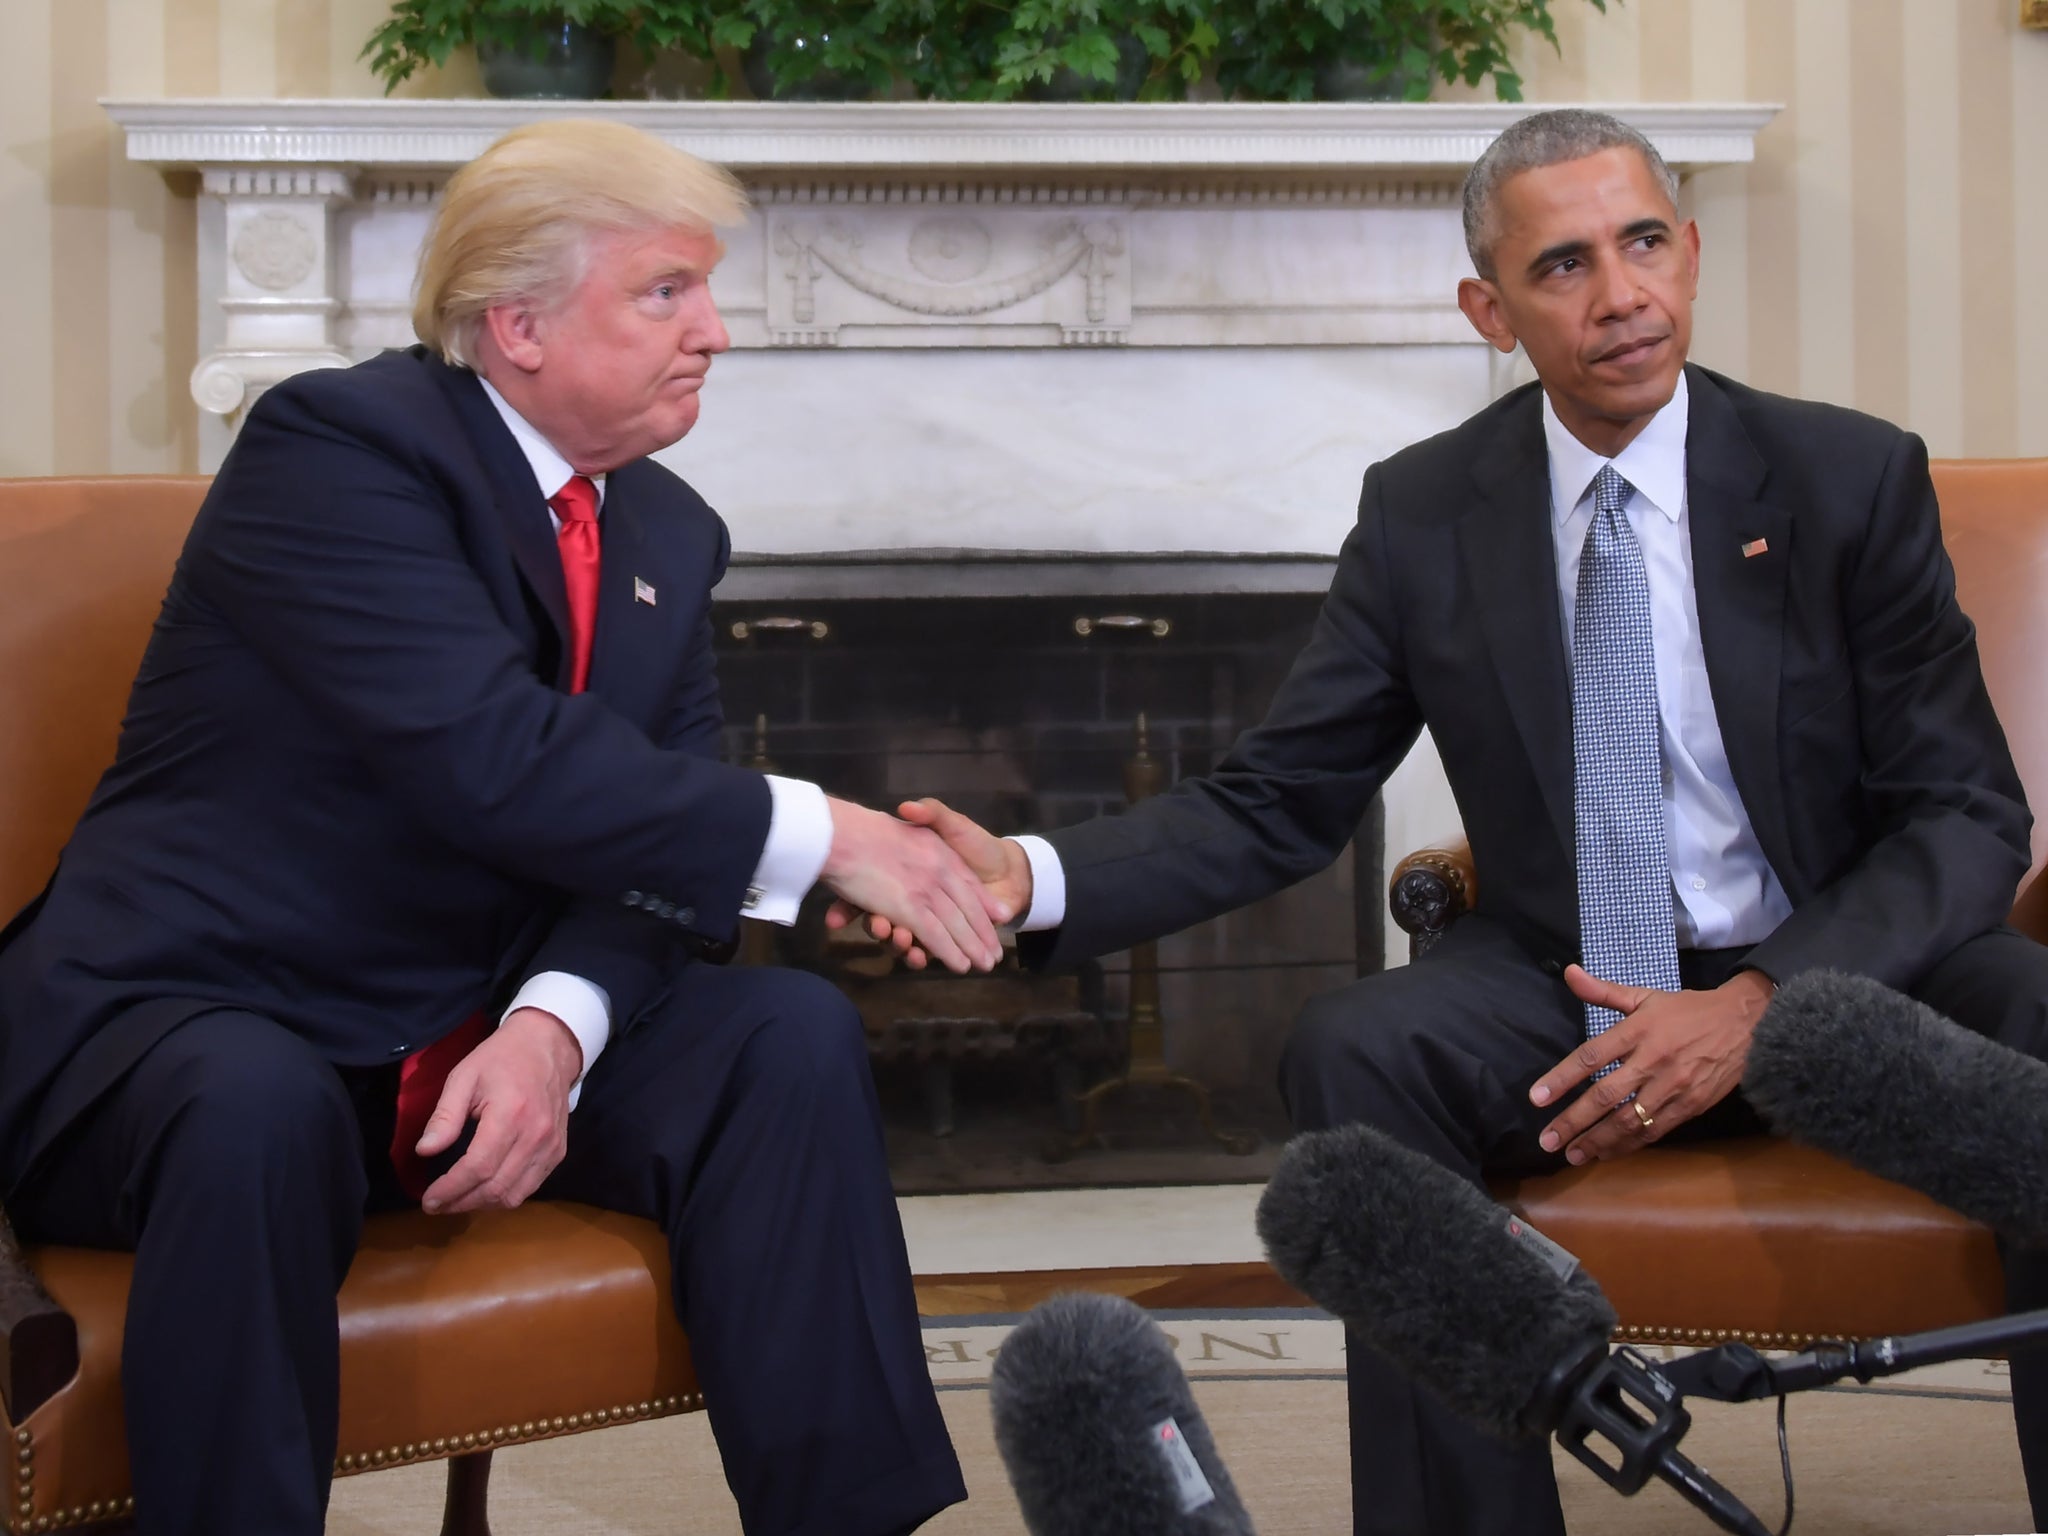 Trump meets Obama after election win